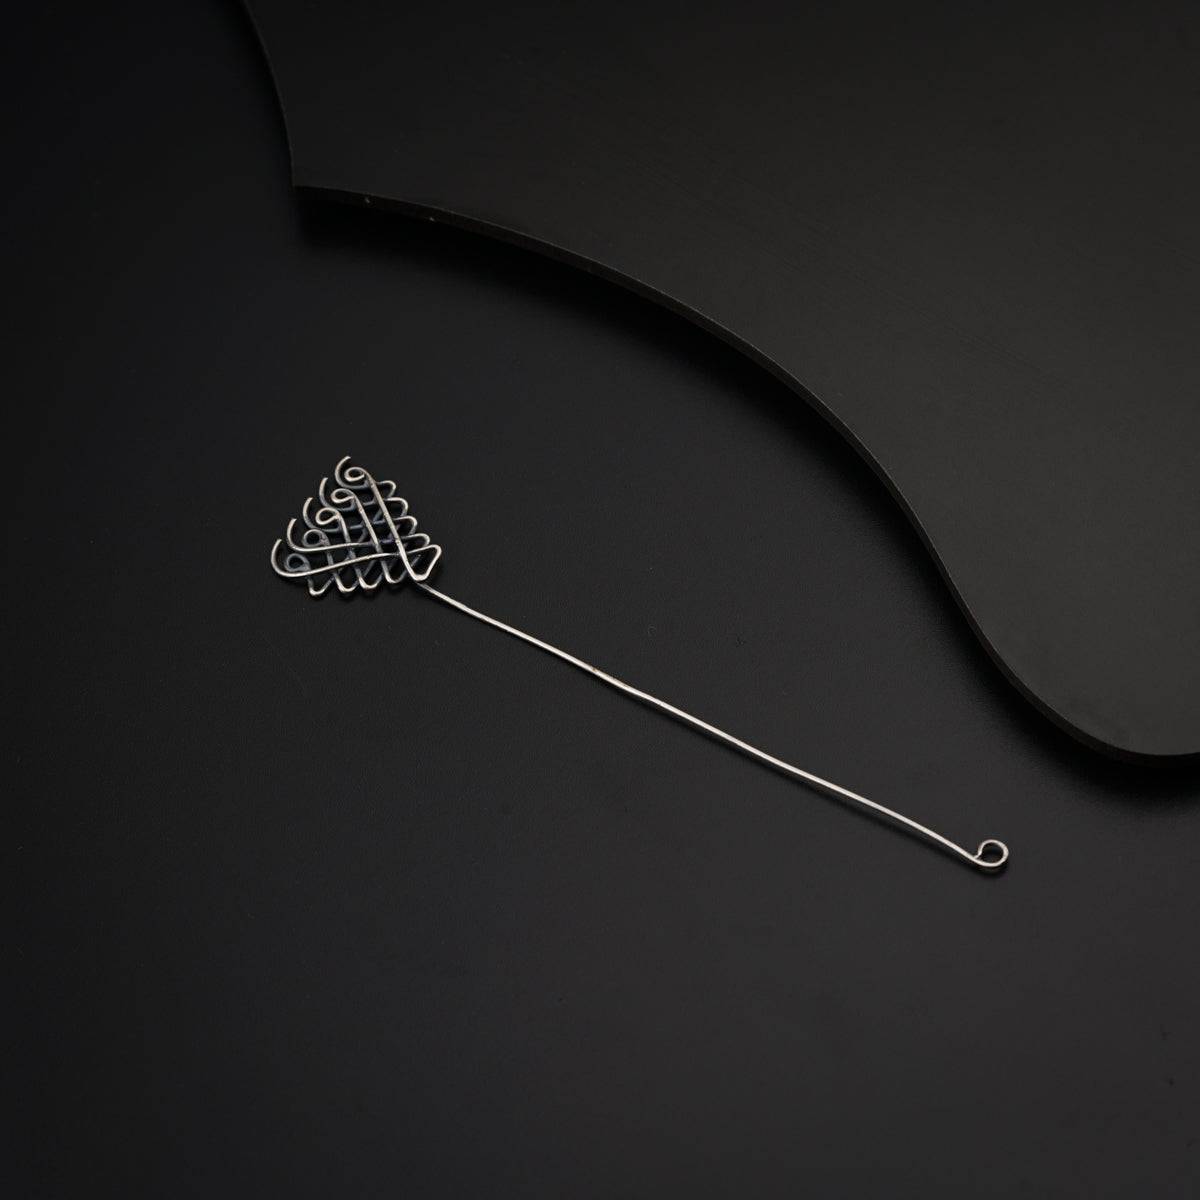 a metal hair comb on a black surface